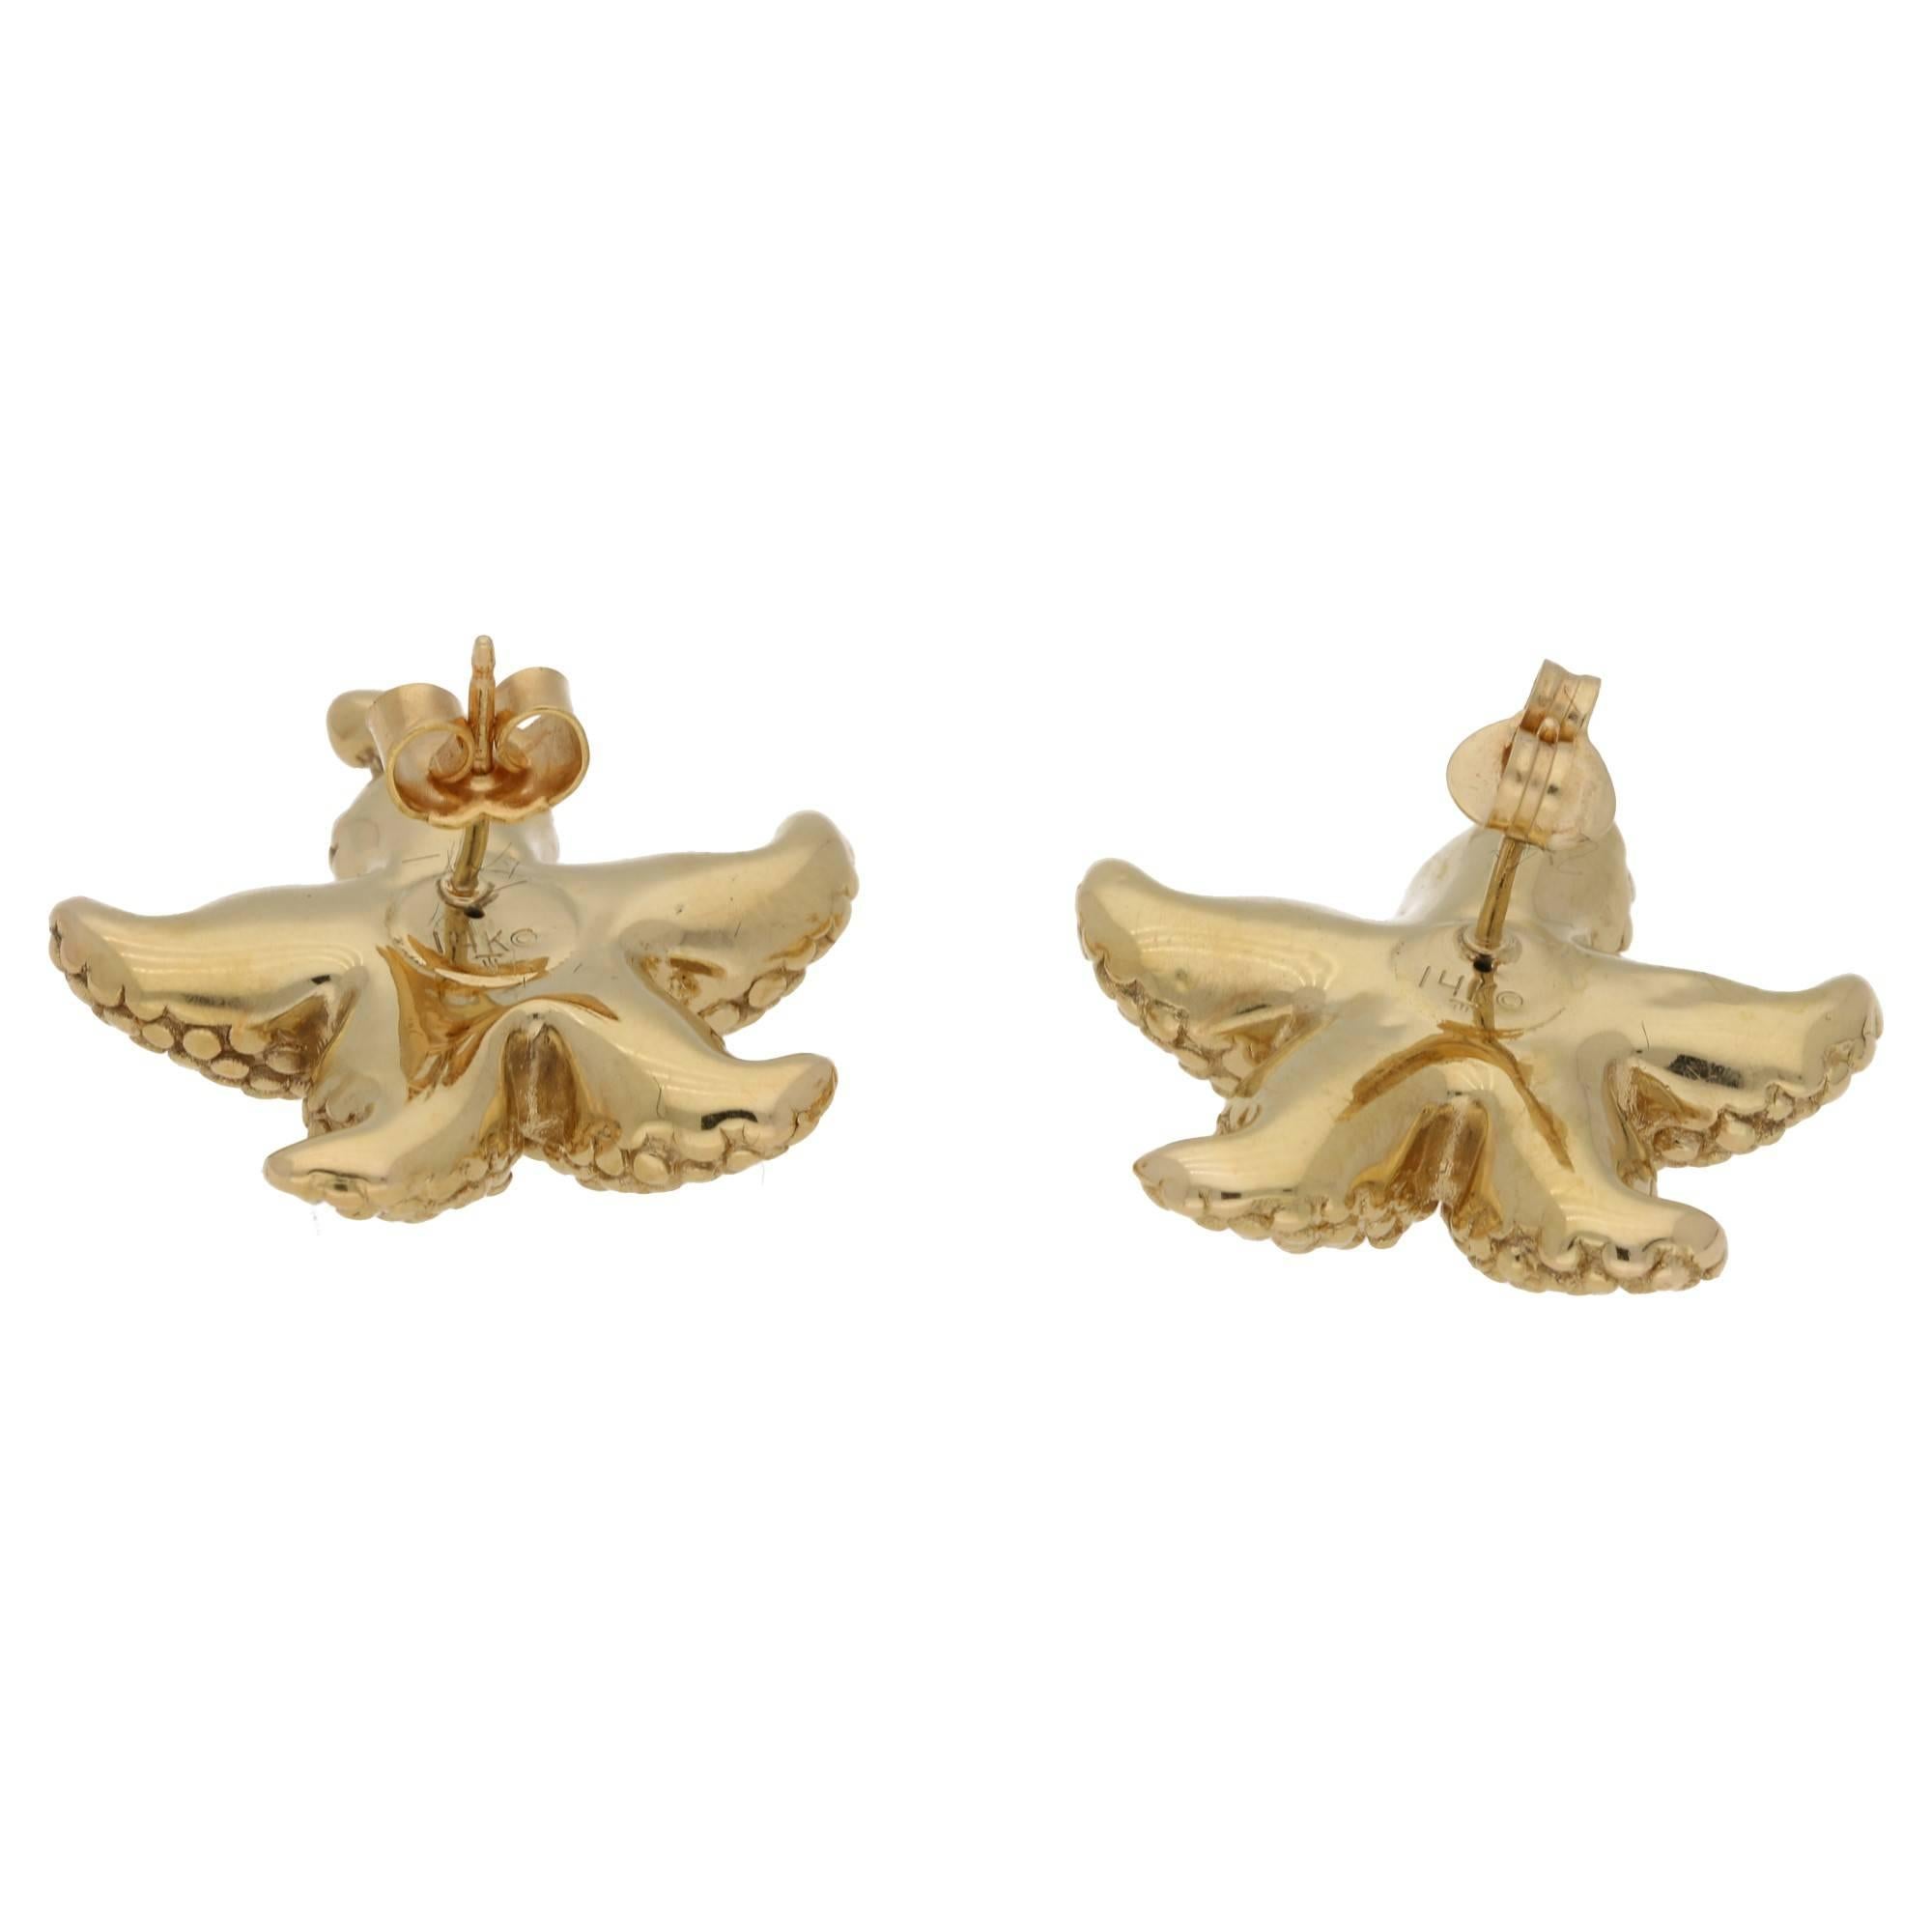 A pair of 14ct gold starfish earrings. The starfish is said to be an emblem of salvation and a loving creature who creates safe travel over 'troubled waters'.  These are on a gold post and butterfly fitting.